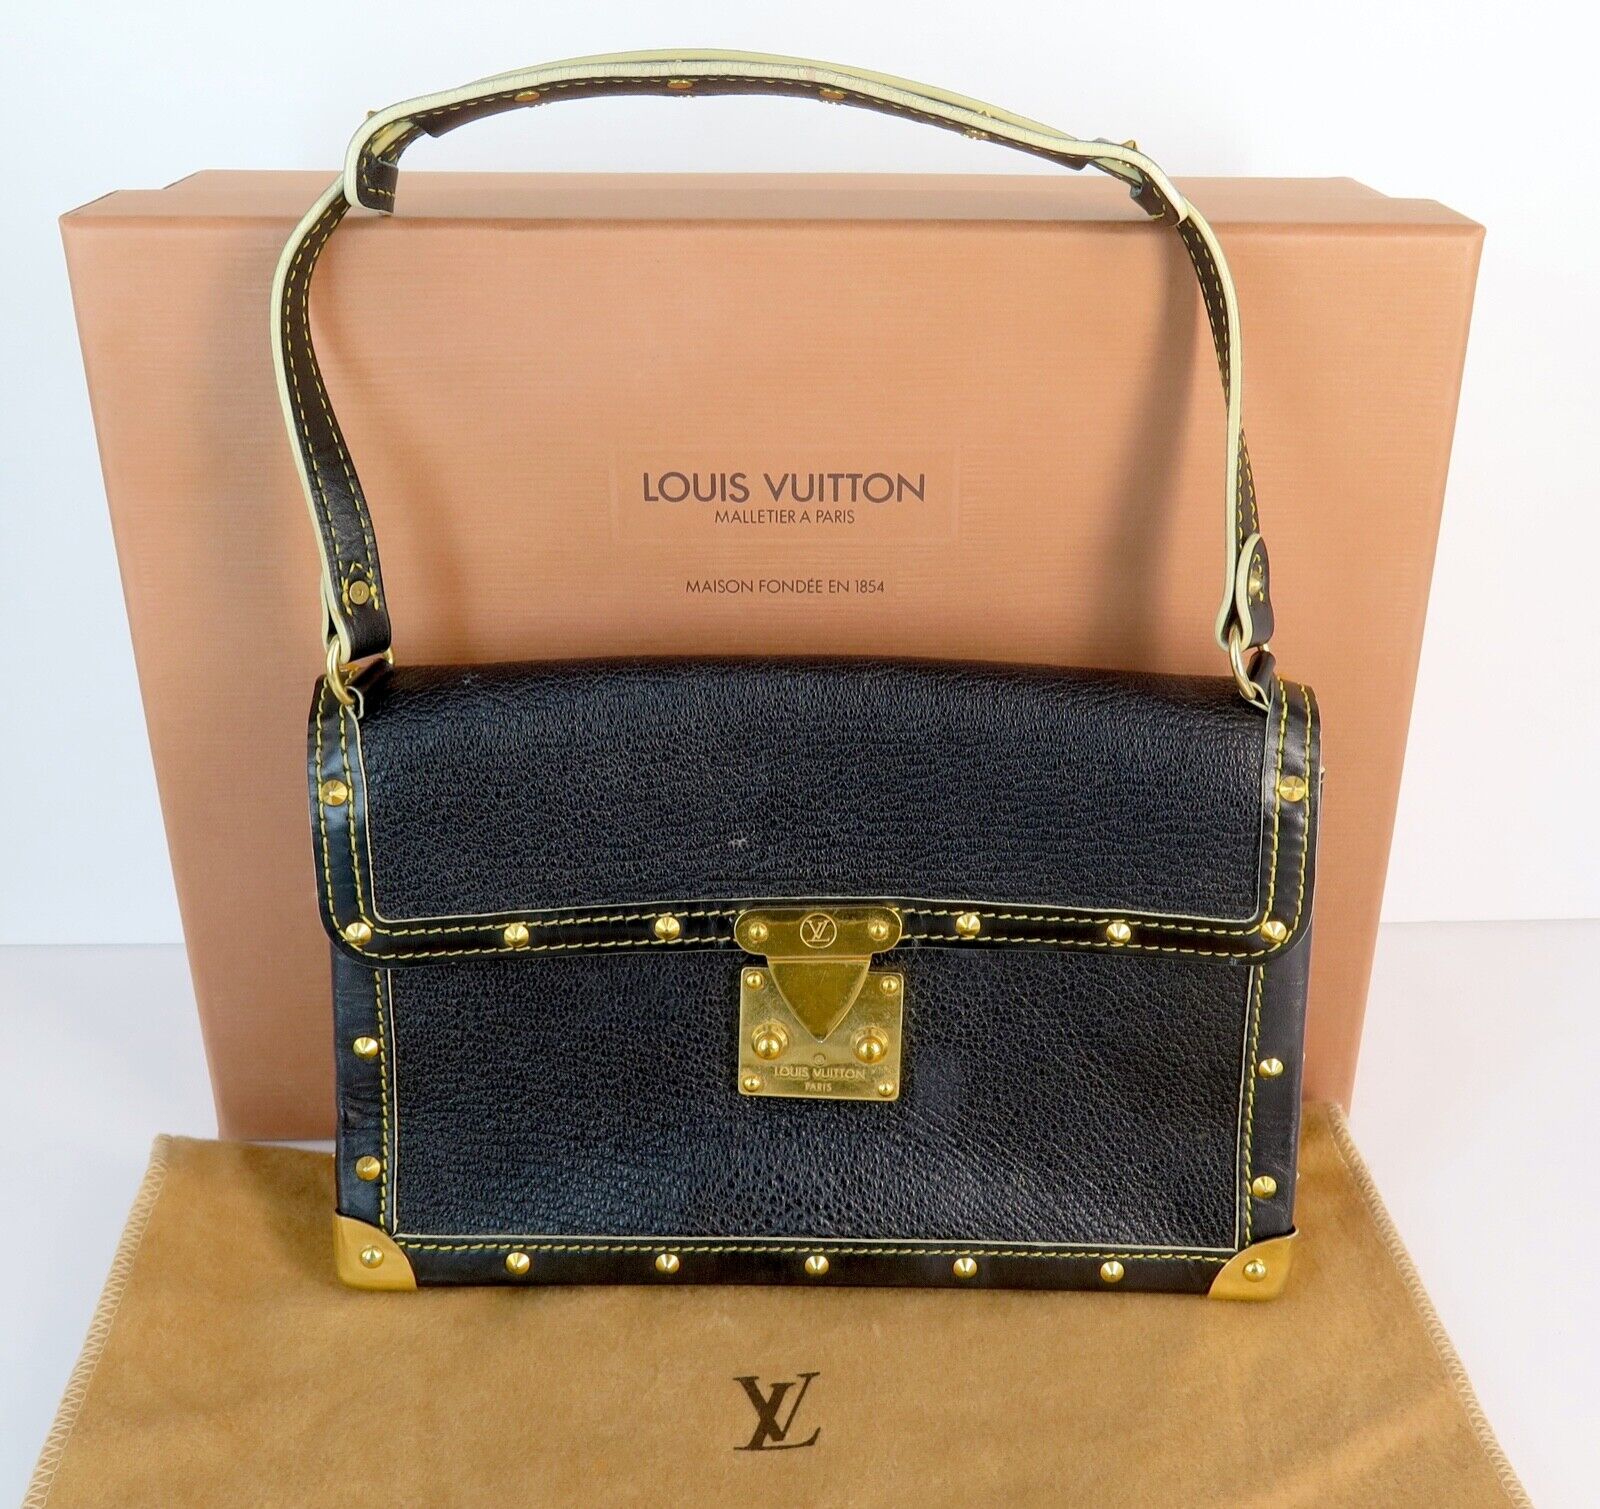 Louis Vuitton L'Aimable Studded Black Bag in Suhali Leather w bag & box